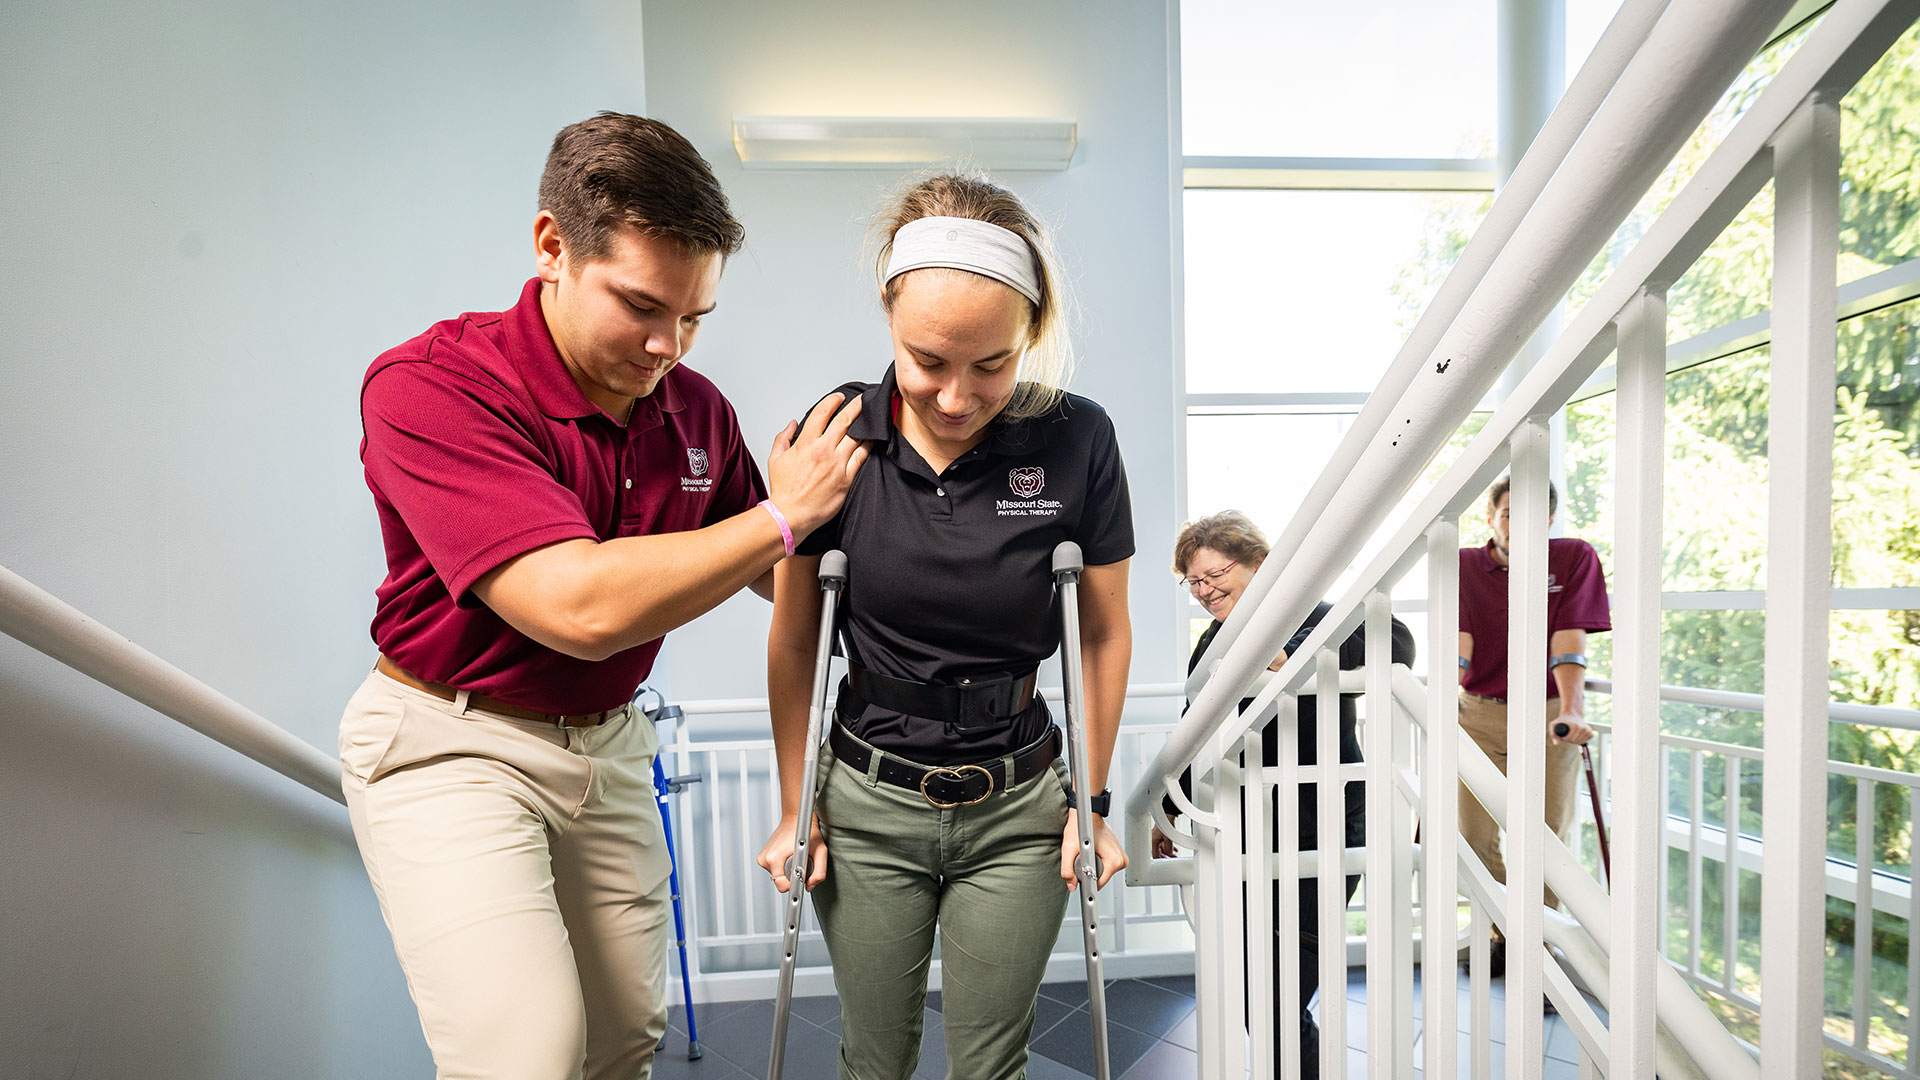 A physical therapy student practices helping another student use crutches.